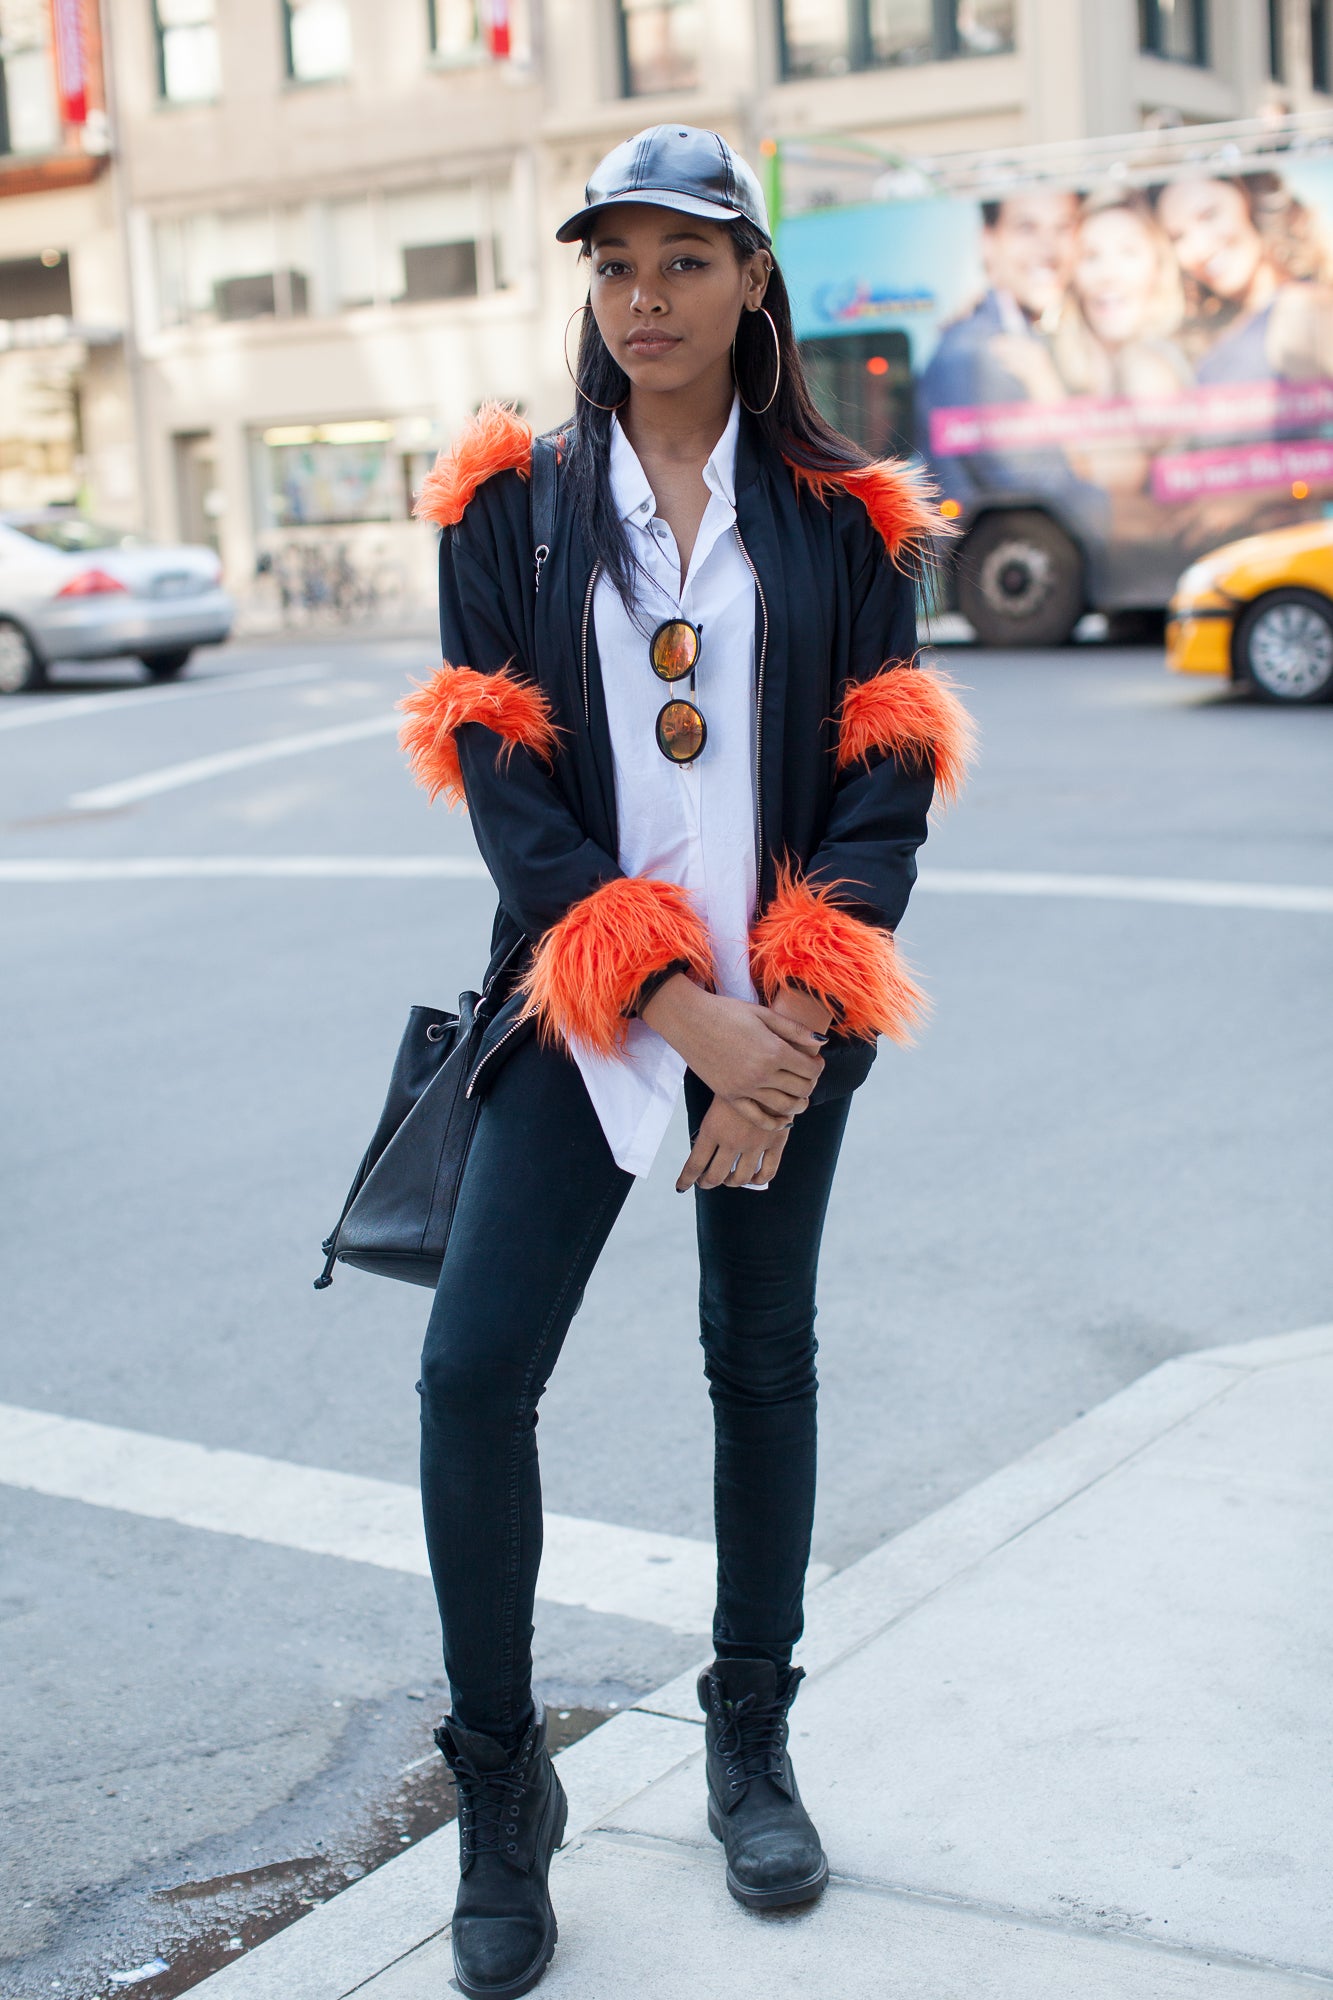 Street Style: 20 On-The-Go Looks That Give Us Life